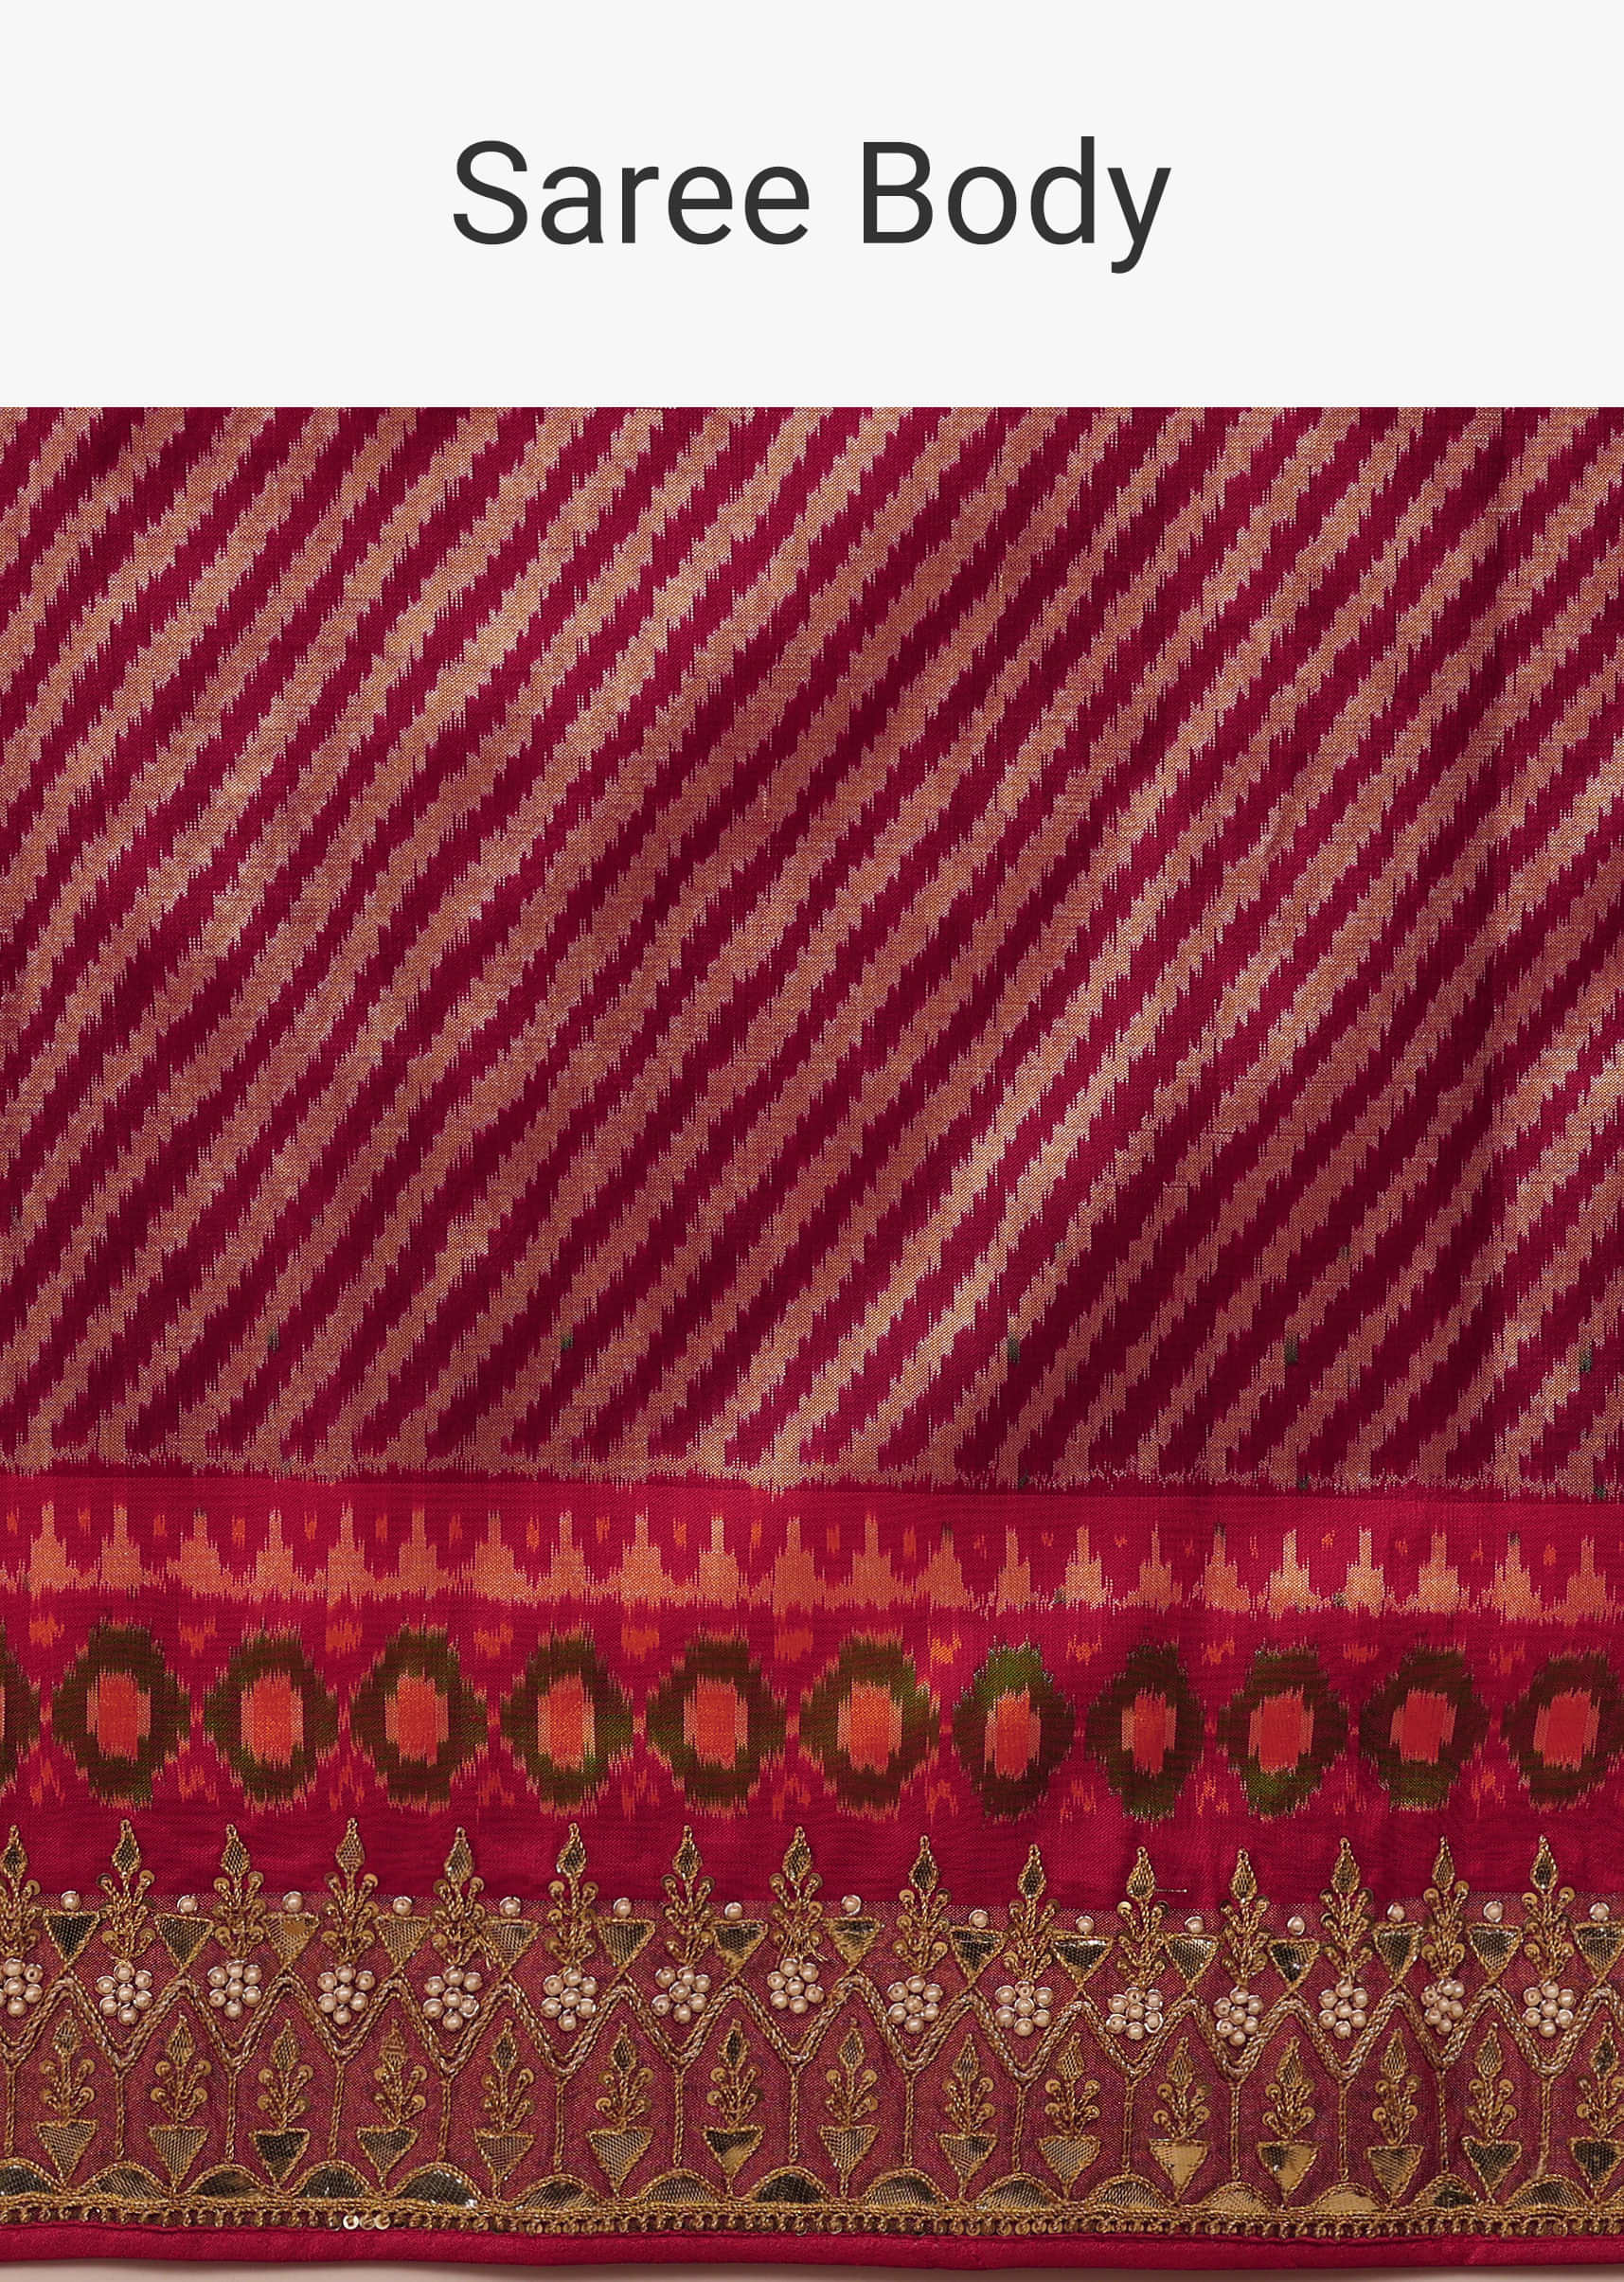 Hot Pink Saree In Pure Silk With Handloom Patola Ikat Weave